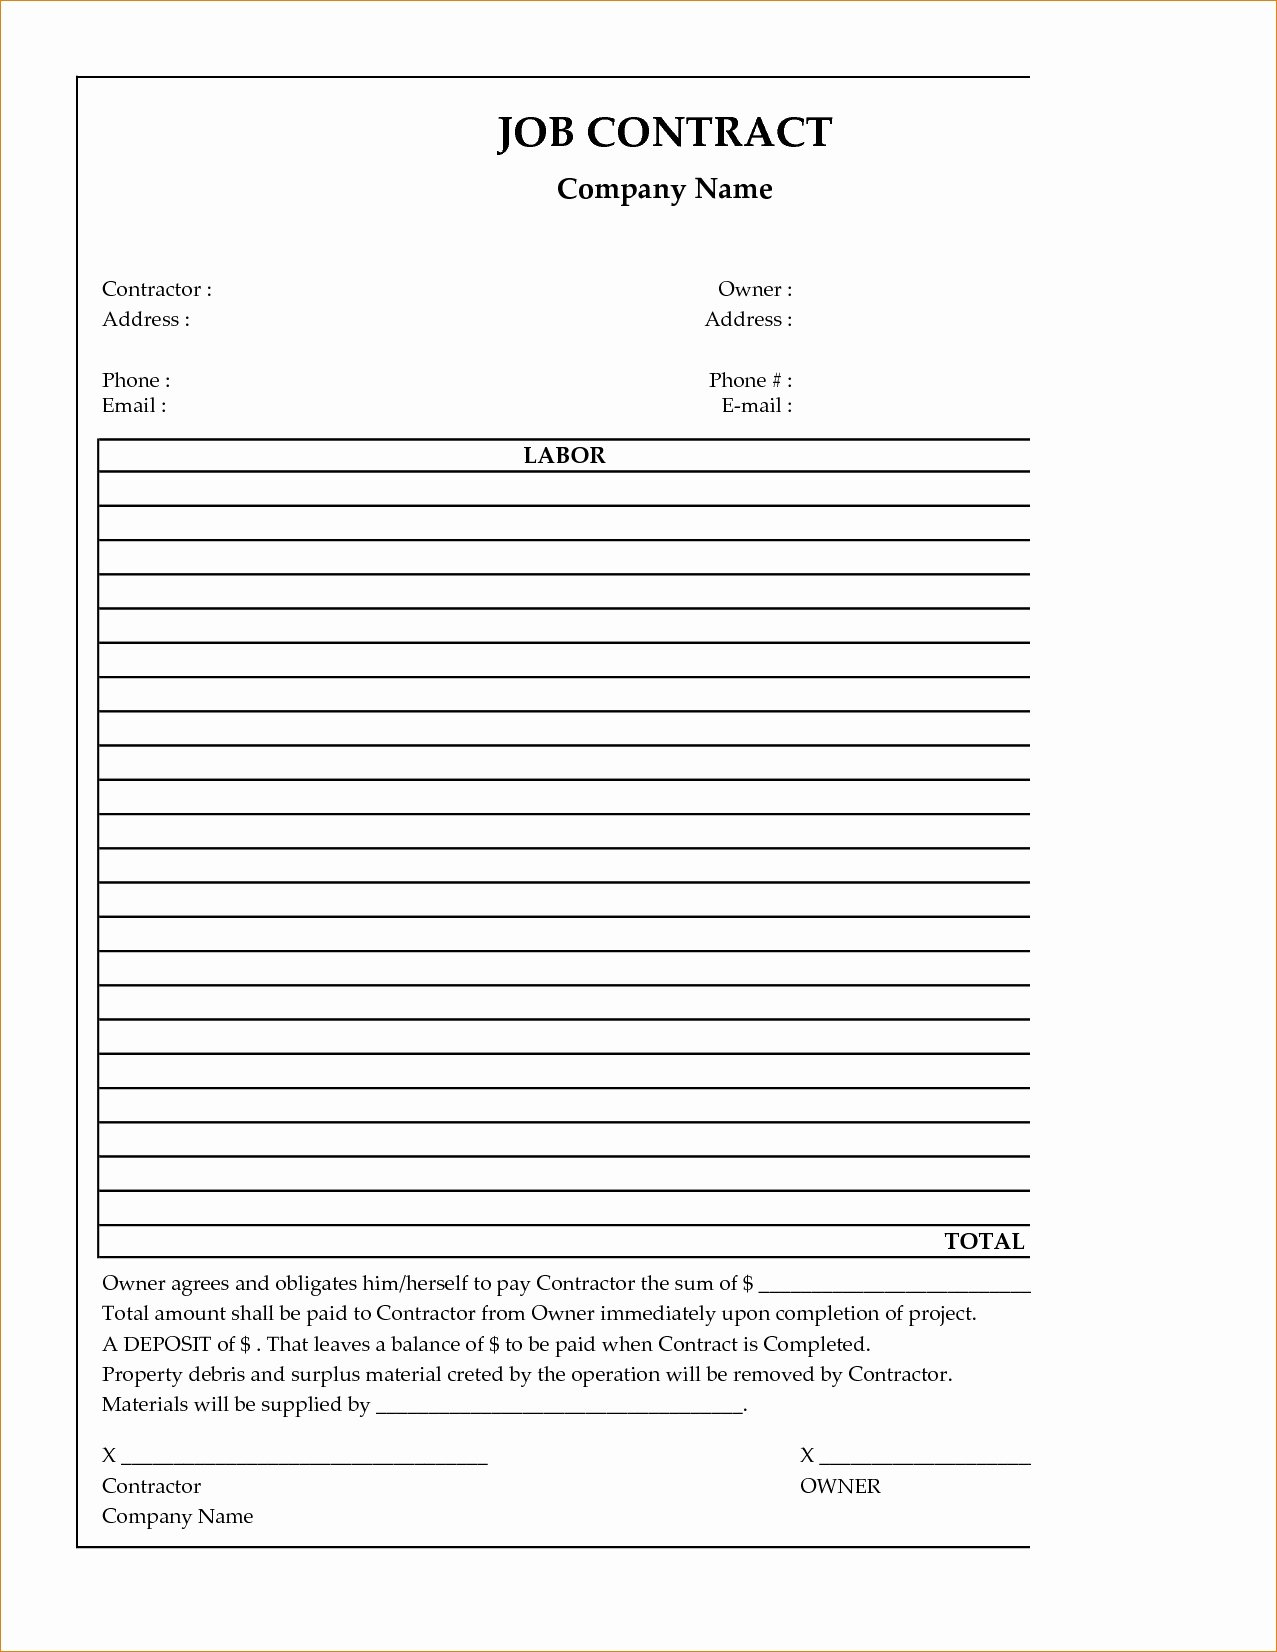 Free Construction Contract Template New Construction Contract Agreement Great 8 Free Construction